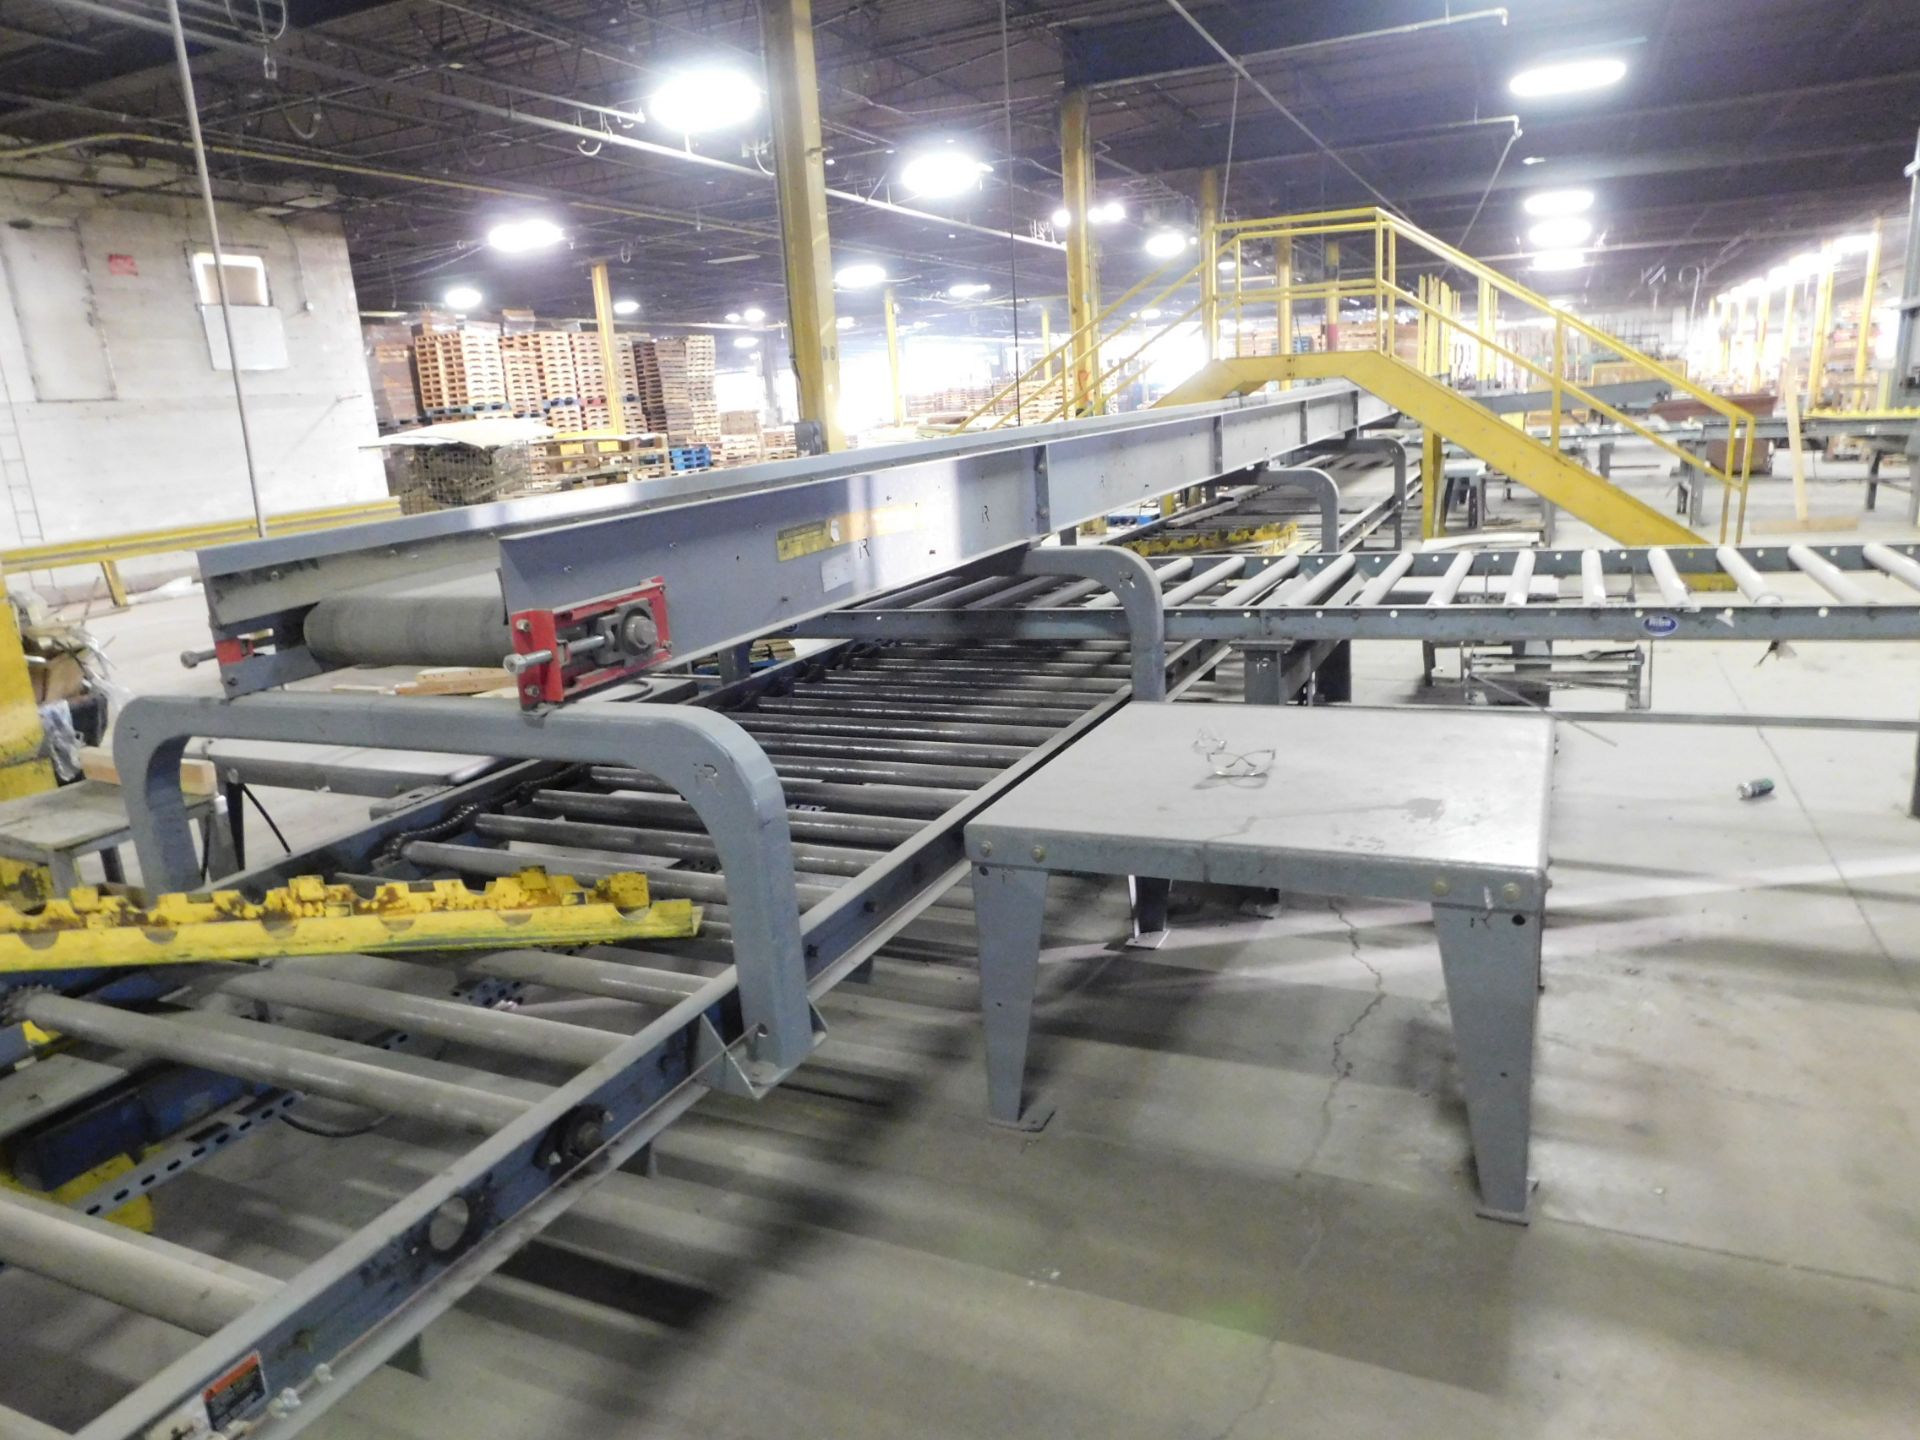 2017 Industrial Resources 6+ Station Pallet Sorting and Repair System, (4) 48" x 150" Infeed - Image 7 of 31